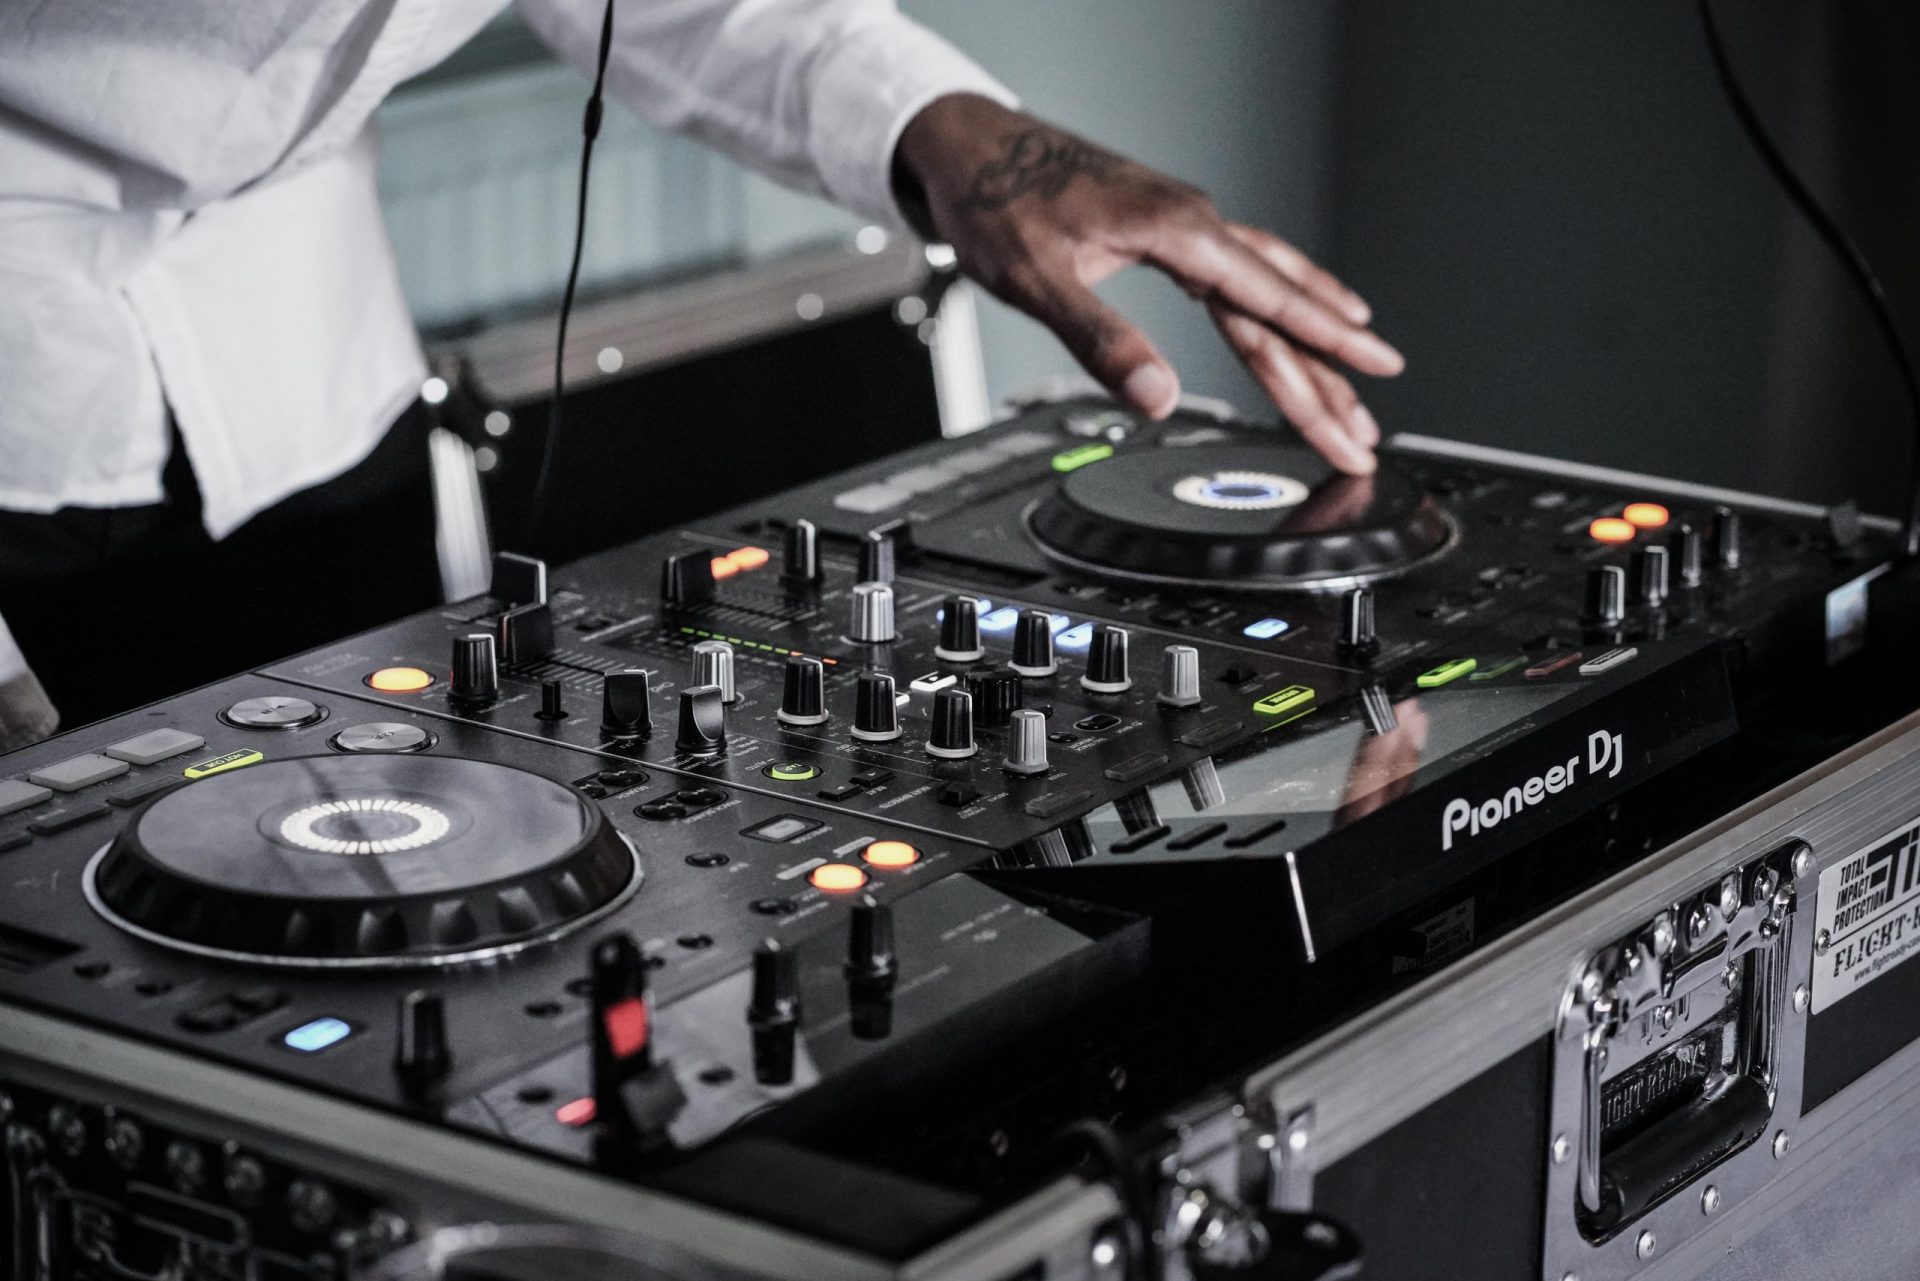 How to Start a DJ Business: Tips for Launching Your Own Successful DJ Company